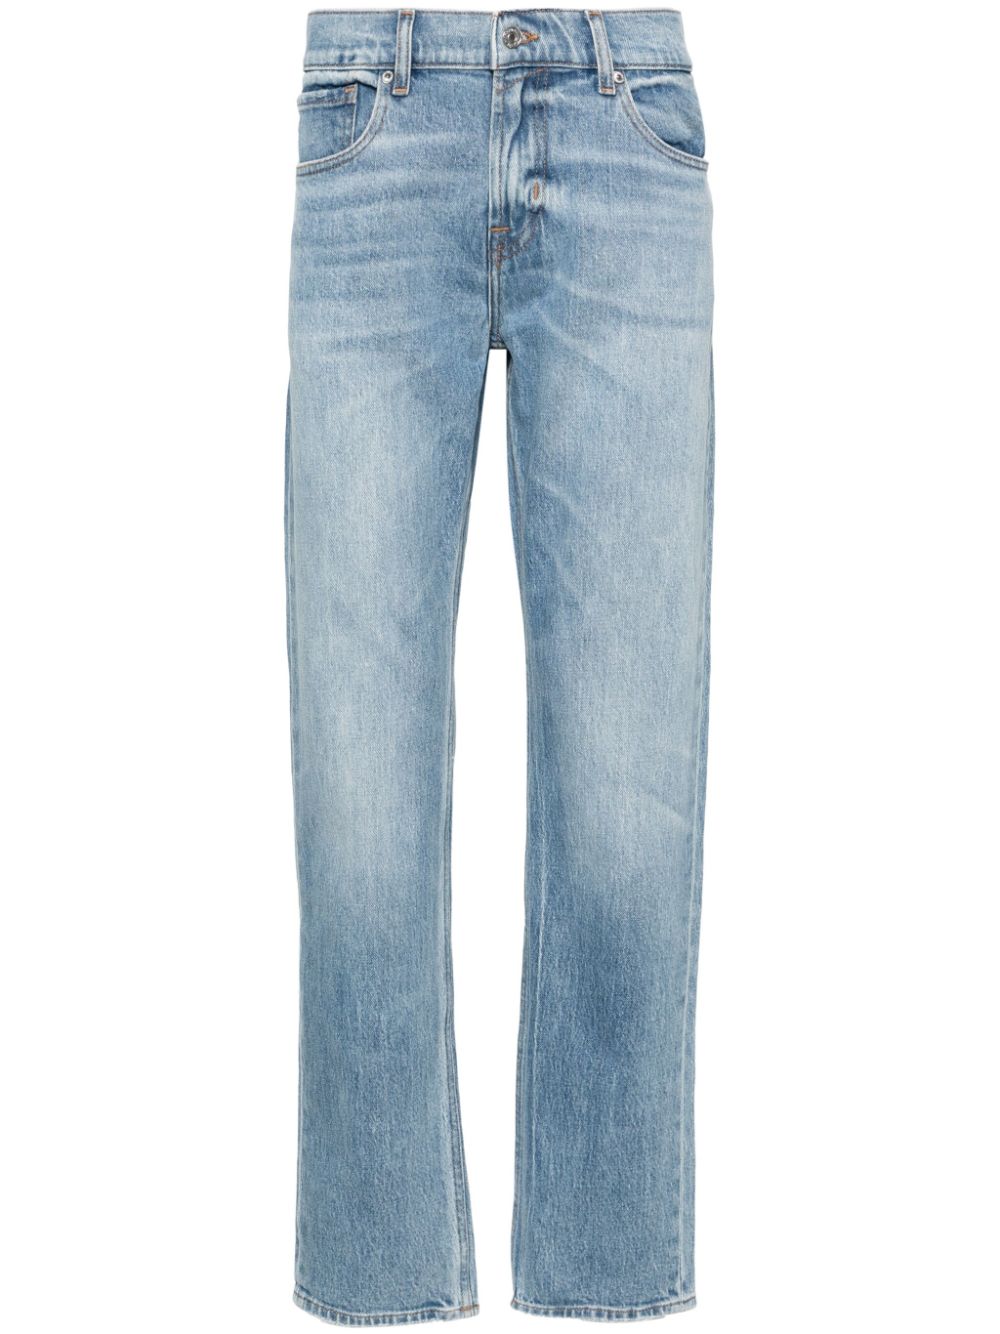 7 For All Mankind 7 FOR ALL MANKIND- Slimmy Jeans